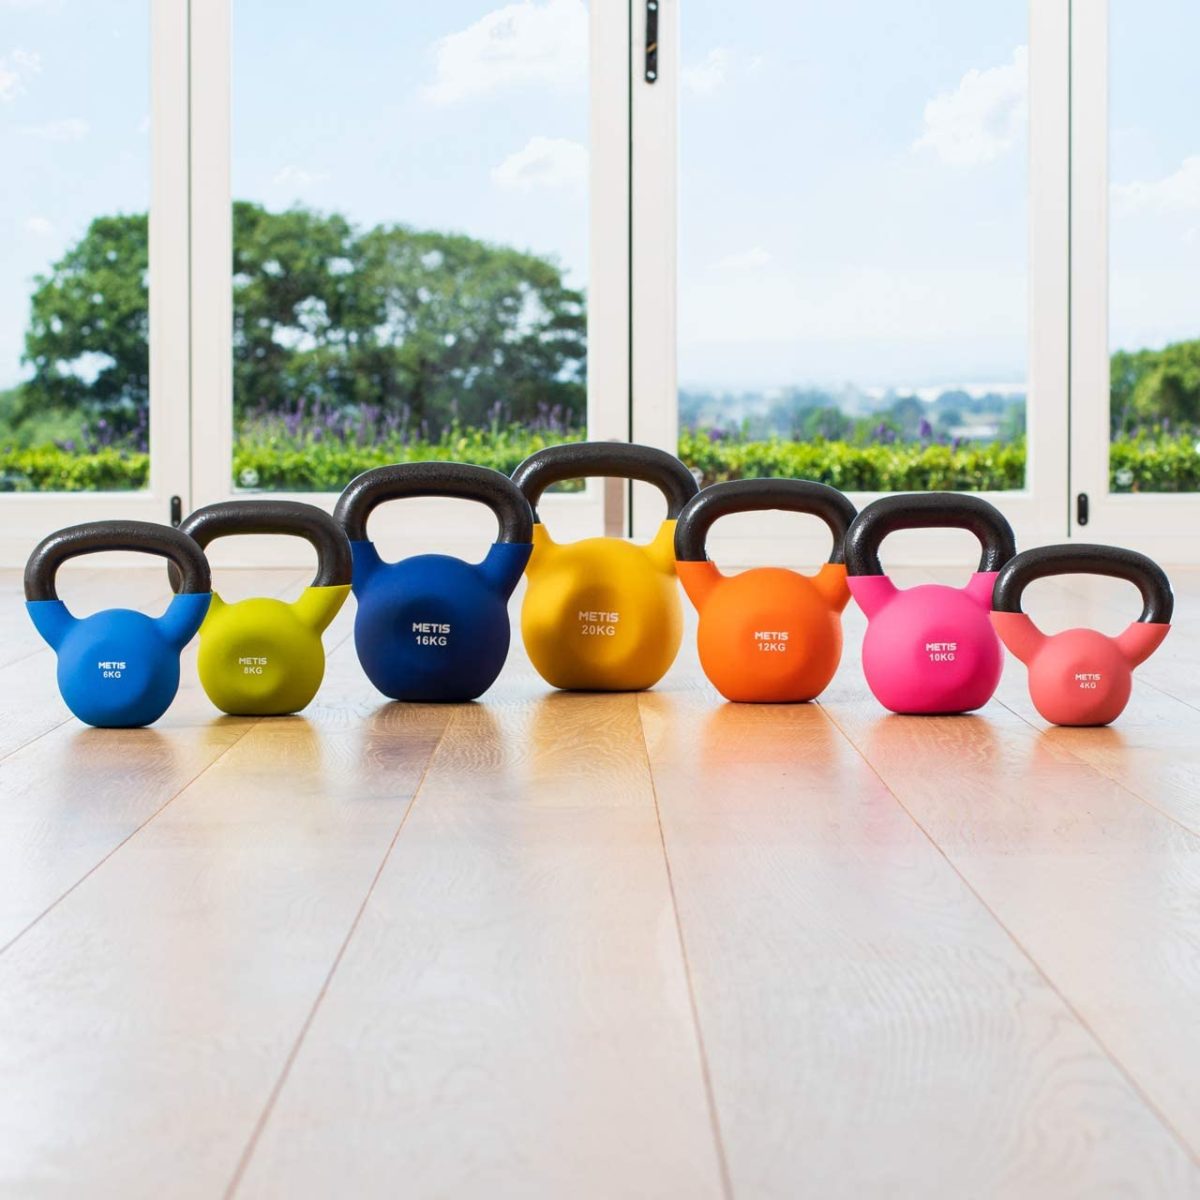 39 pieces of workout equipment you can buy online to upgrade your home gym | let this list of workout equipment help you build your at-home gym